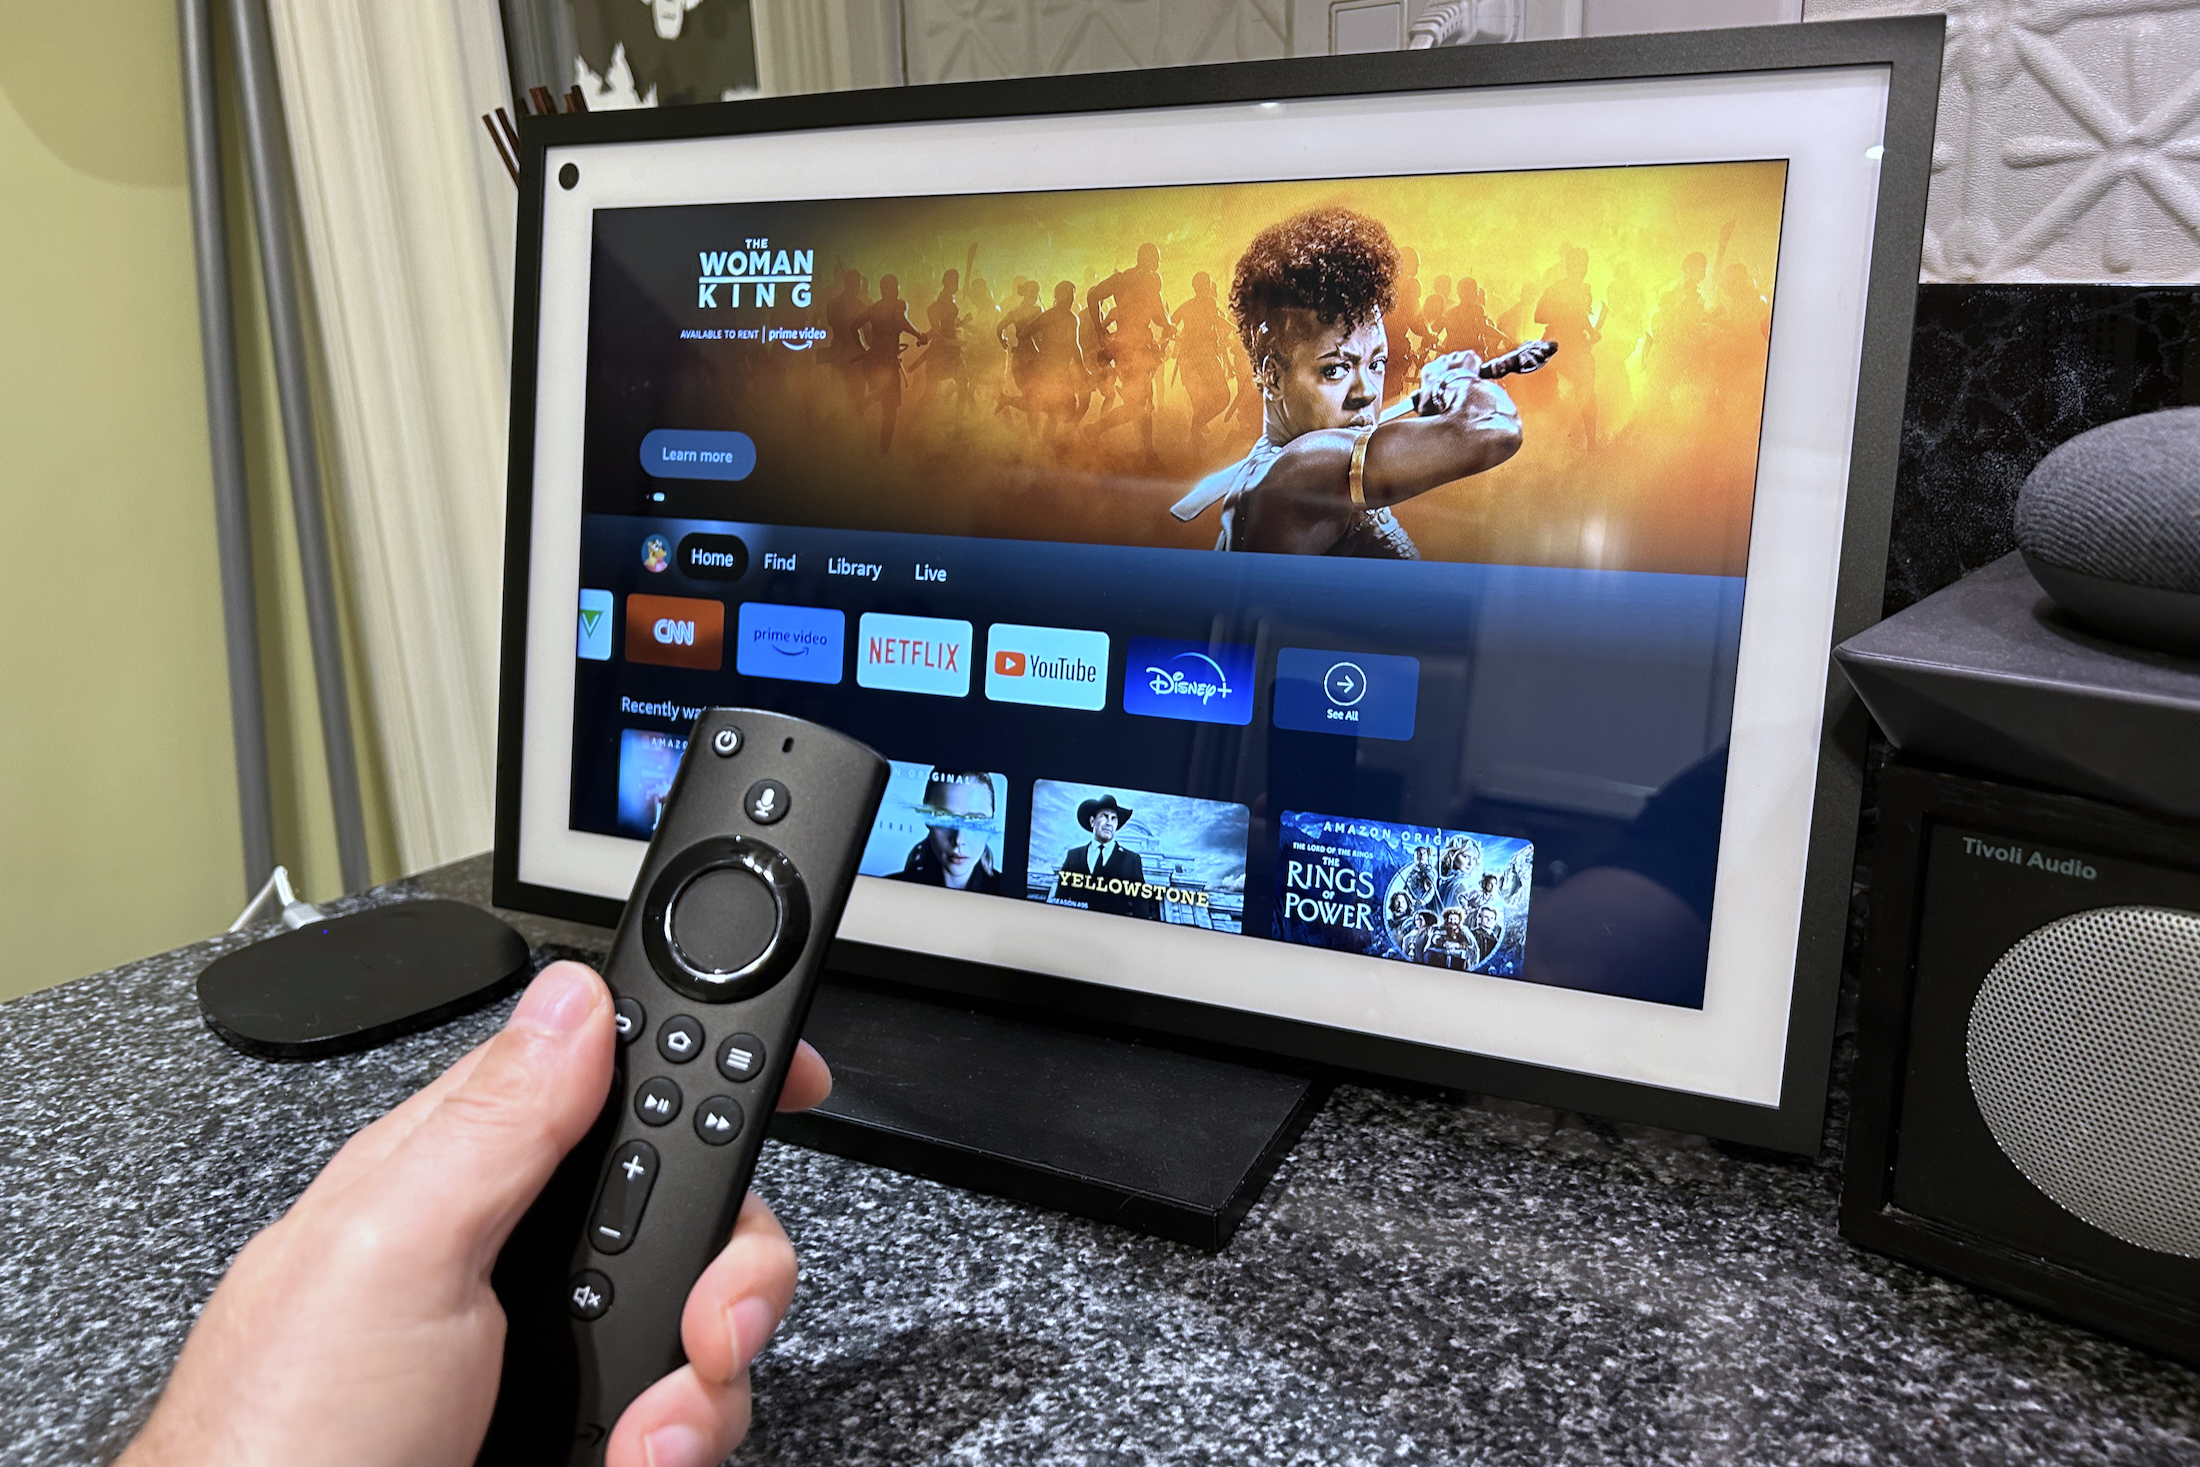 Amazon Echo Show 15 showing Fire TV experience, with an Amazon Fire TV voice remote in the foreground.